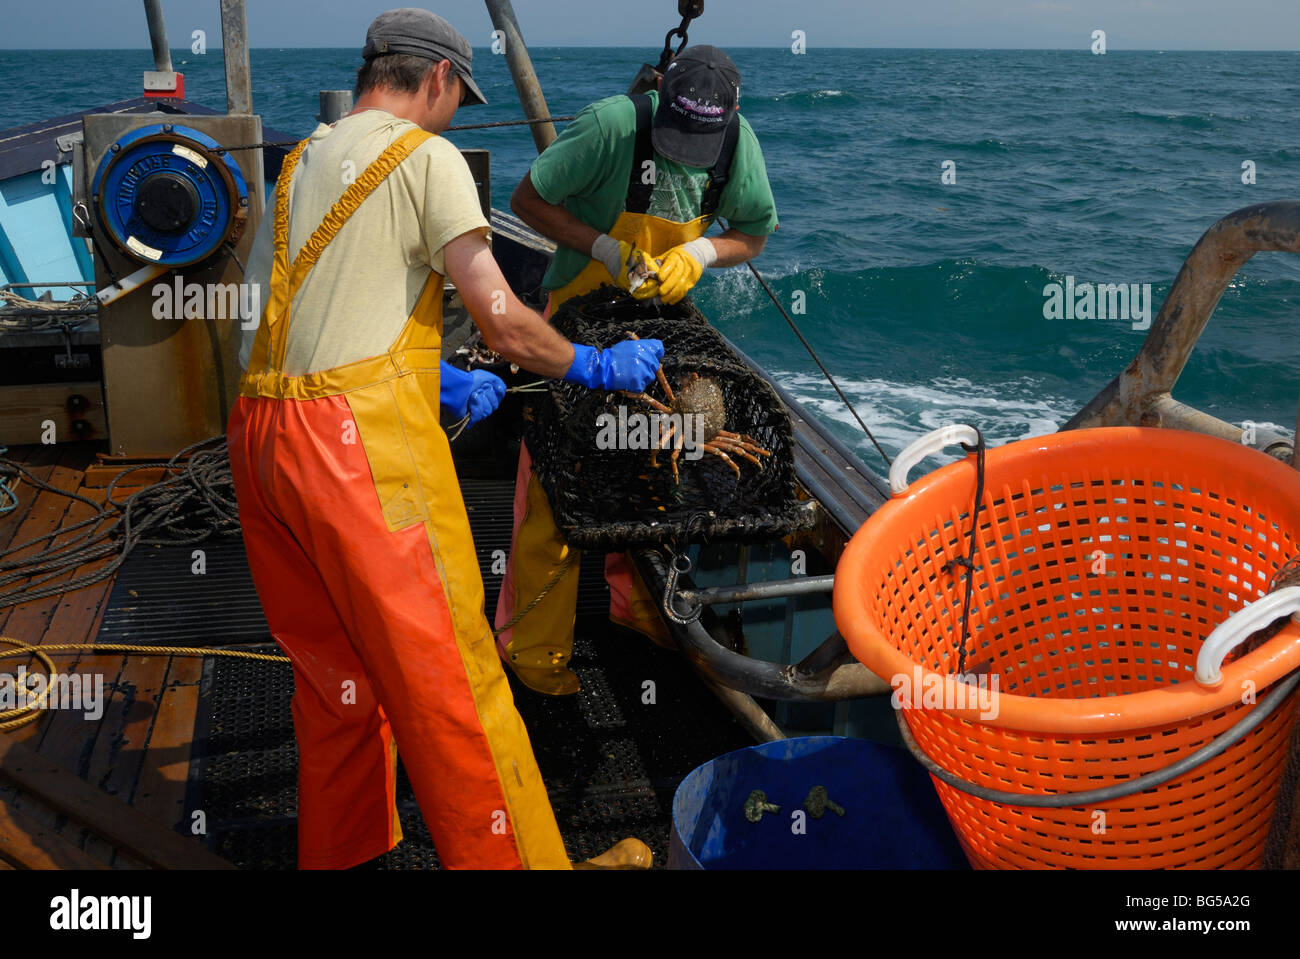 Lobster fishermen retrieving a Spider Crab from a pot and baiting the pot with fish, Cardigan Bay, Wales. Stock Photo